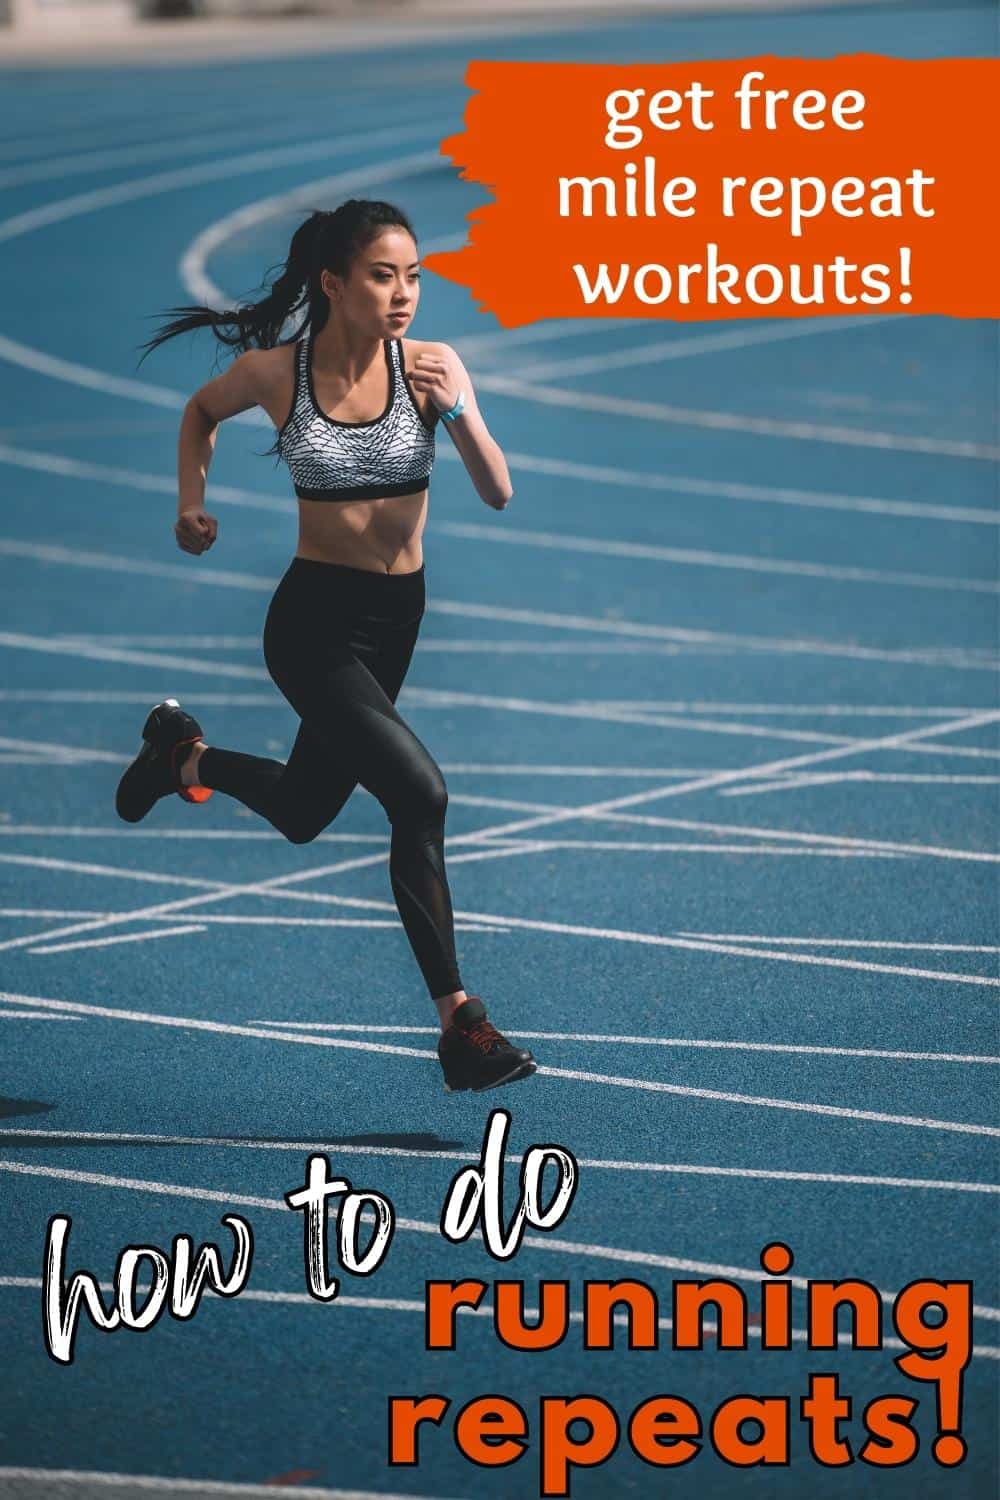 A woman sprinting on a blue track, with a text overlay that says how to do running repeats.